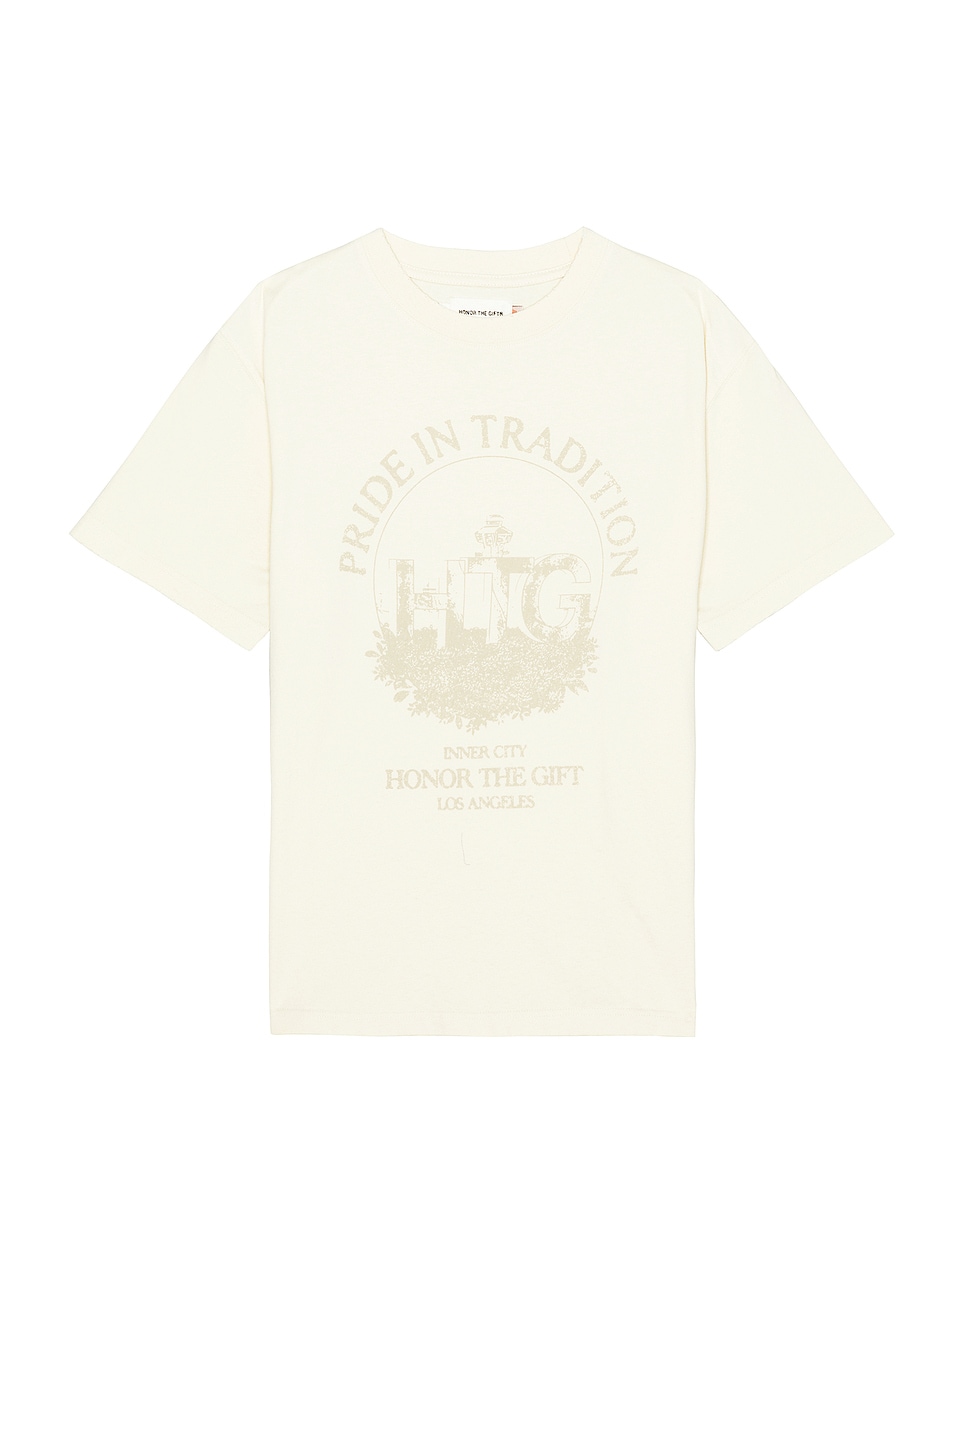 Pride in Tradition Short Sleeve Tee in Cream